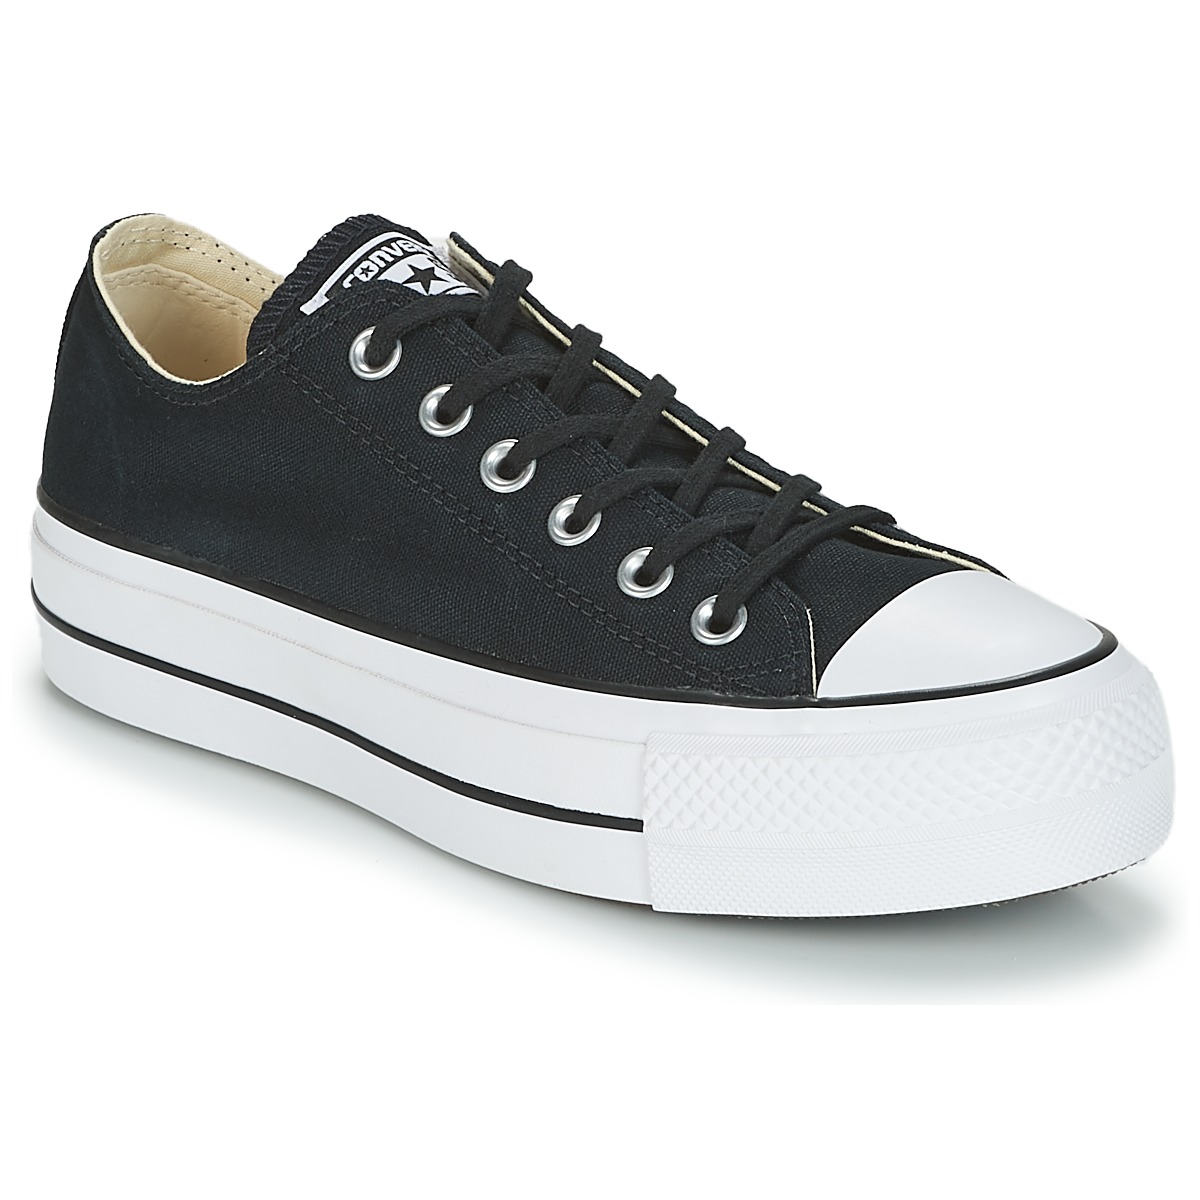 chuck taylor all star lift buckle low top